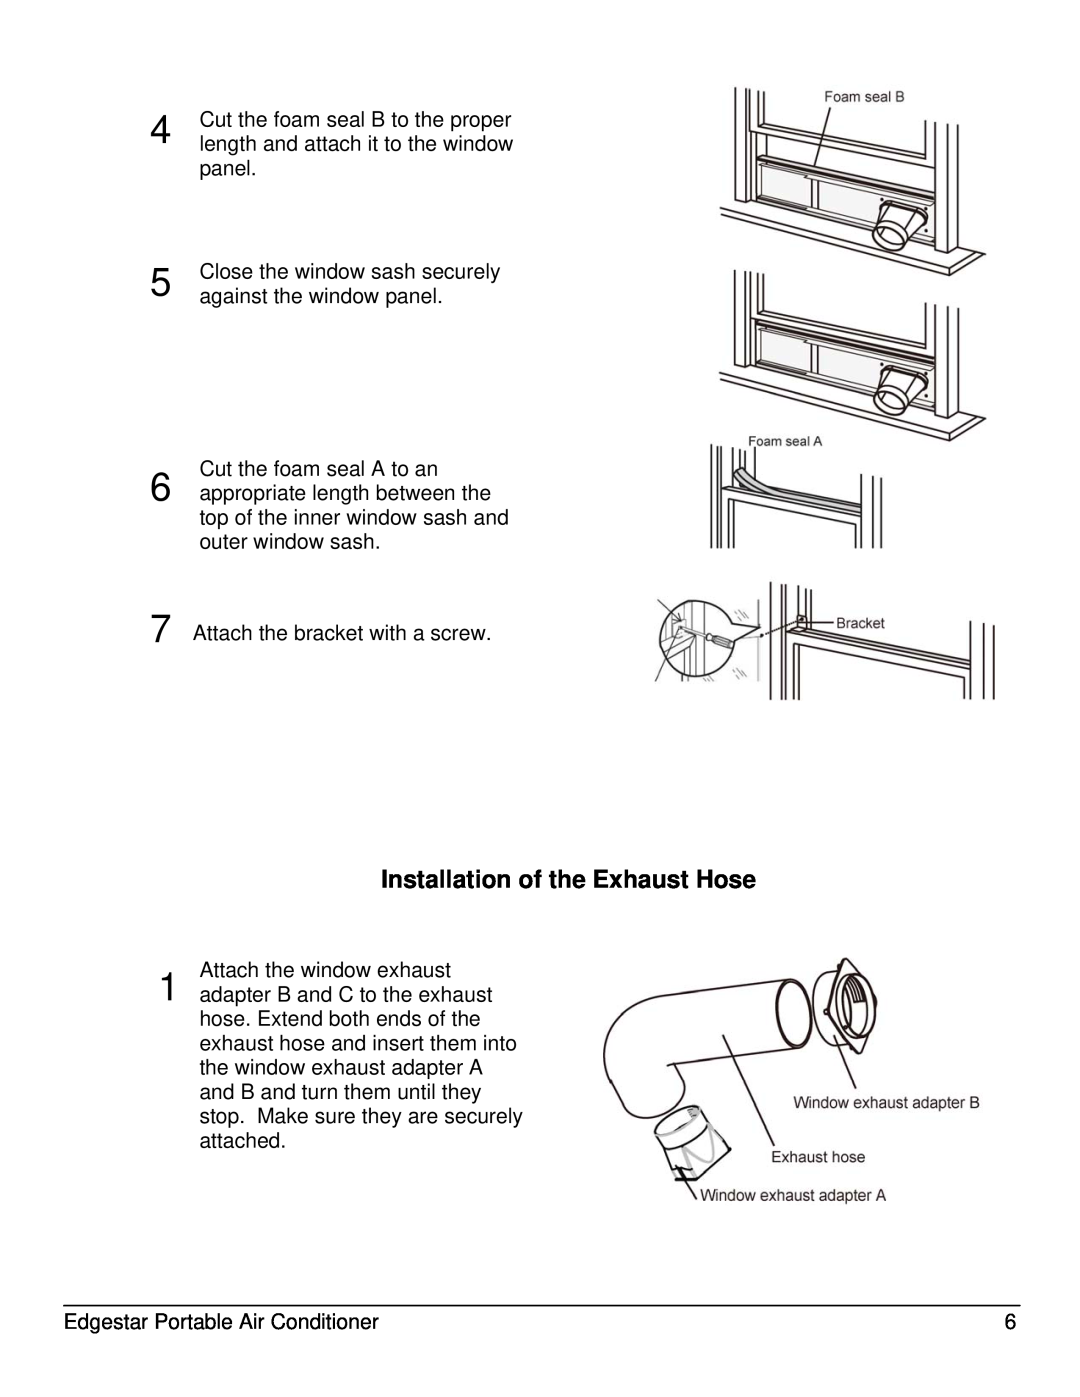 EdgeStar AP10002BL owner manual Installation of the Exhaust Hose 